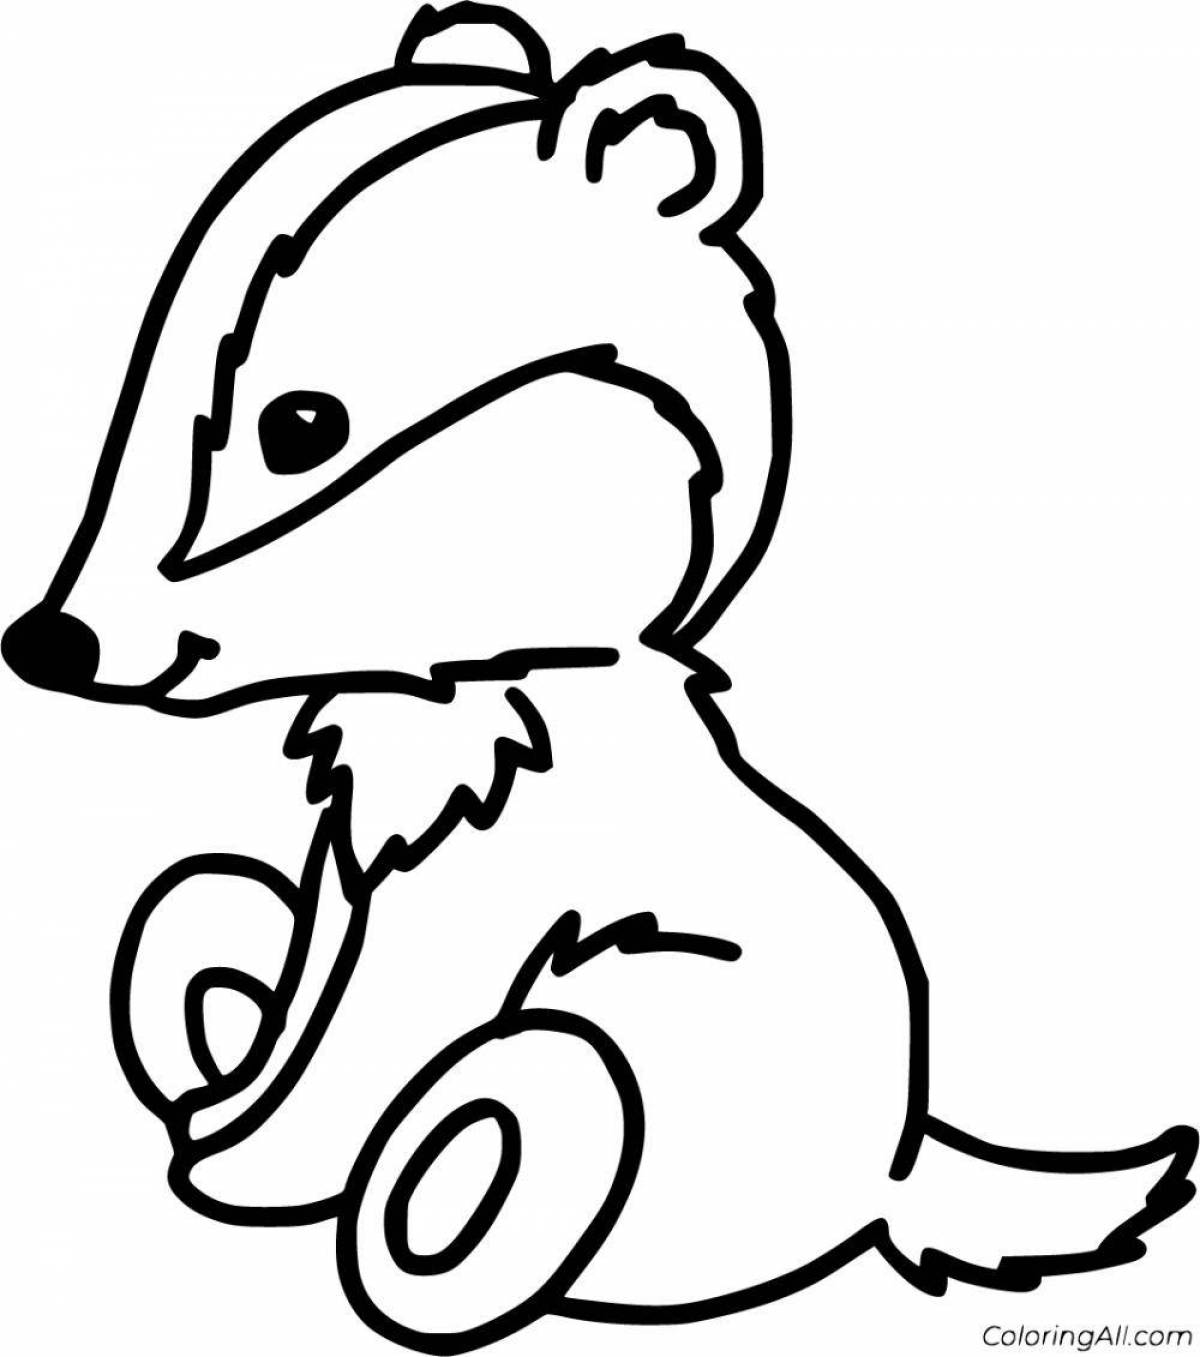 Cute badger coloring pages for kids